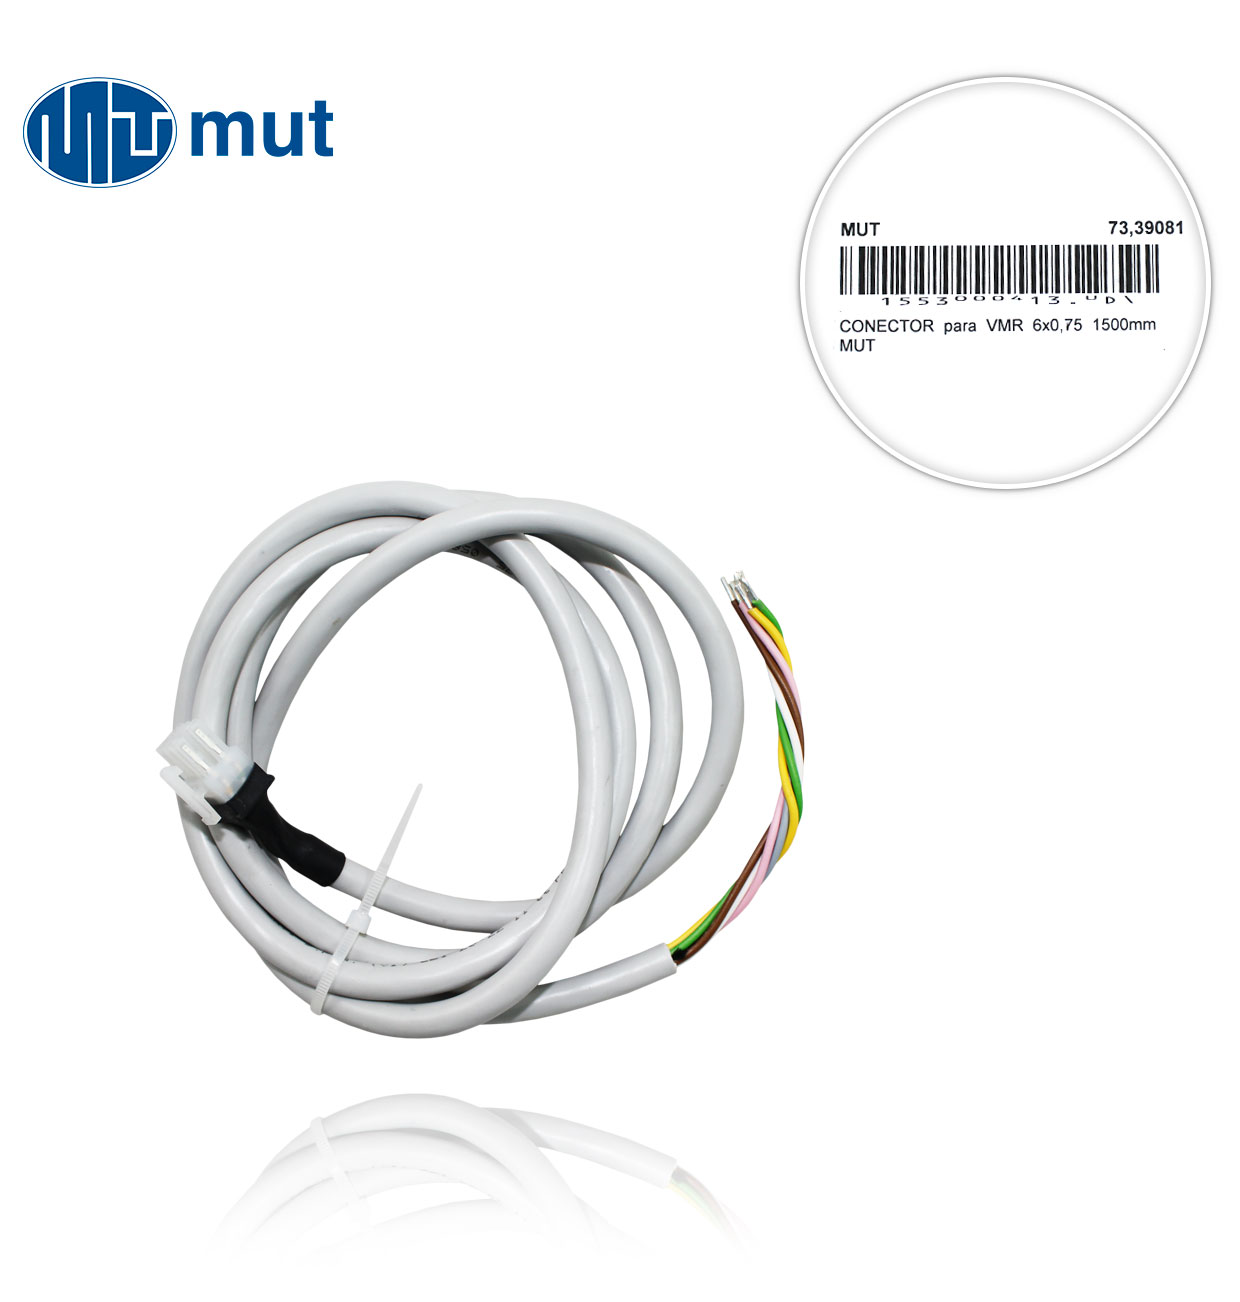 6x0.75  1500mm MUT CONNECTOR  for VMR